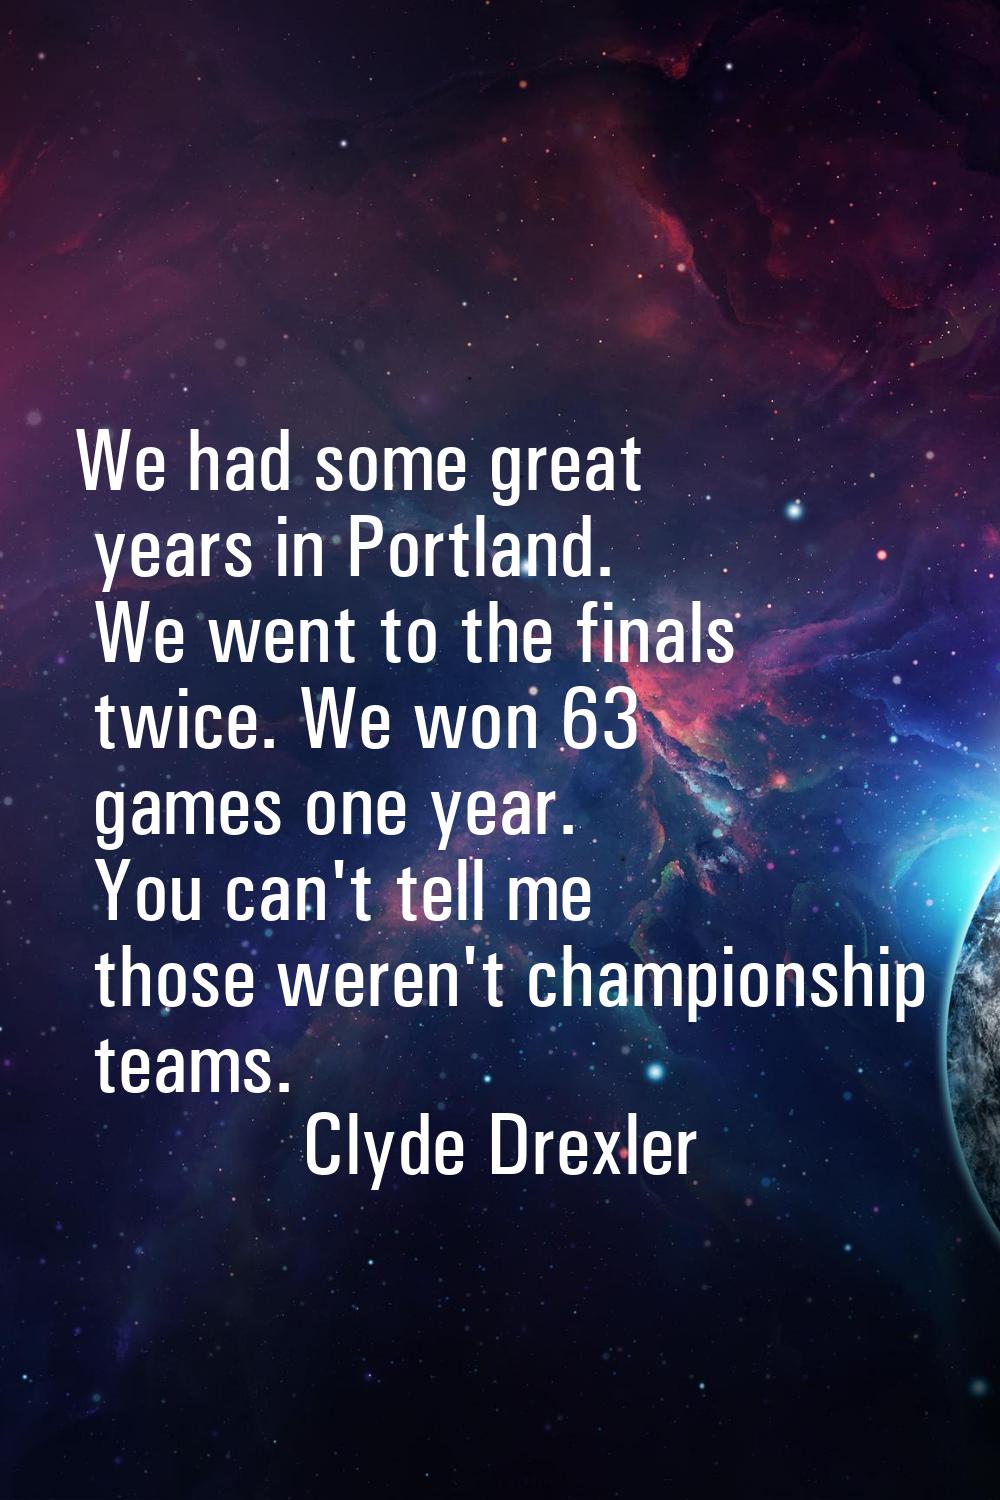 We had some great years in Portland. We went to the finals twice. We won 63 games one year. You can